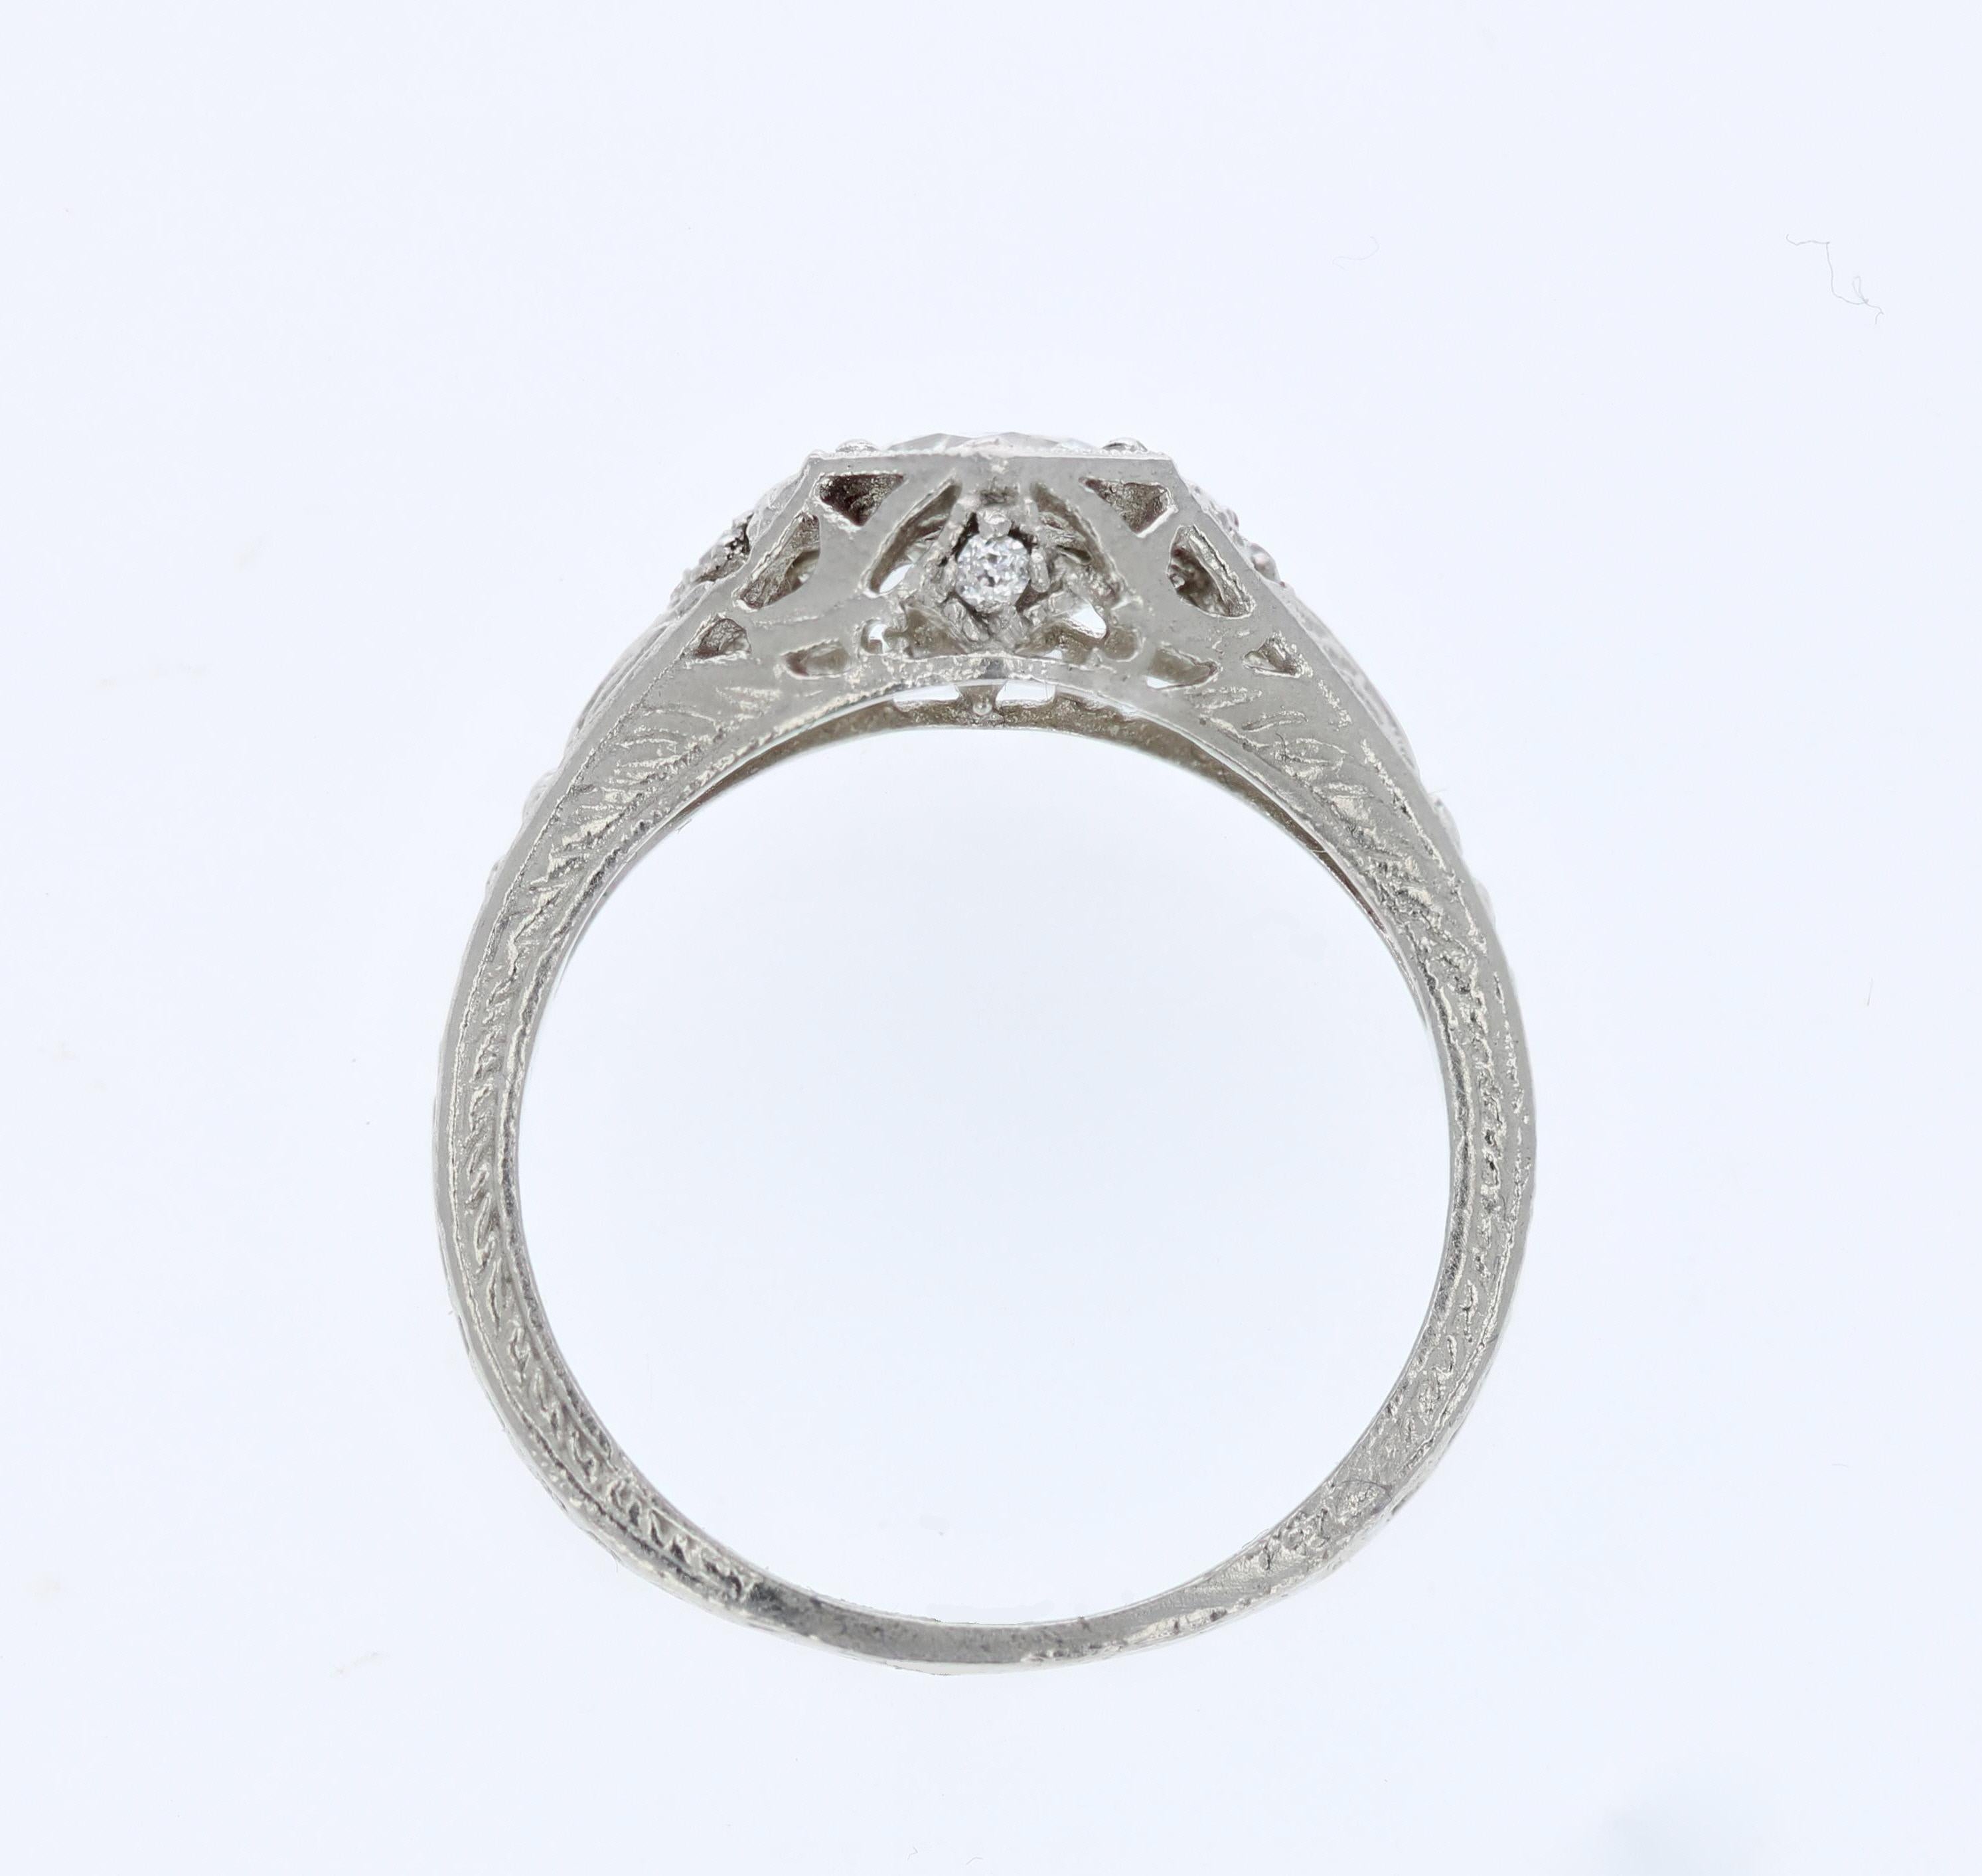 A gleaming white 0.59 carat old European diamond sits in a unique hexagon-shaped inset bezel in this Edwardian engagement ring. Detailed engraving and fine millegrain adorn the platinum setting and shank, along with 4 round accent diamonds. The